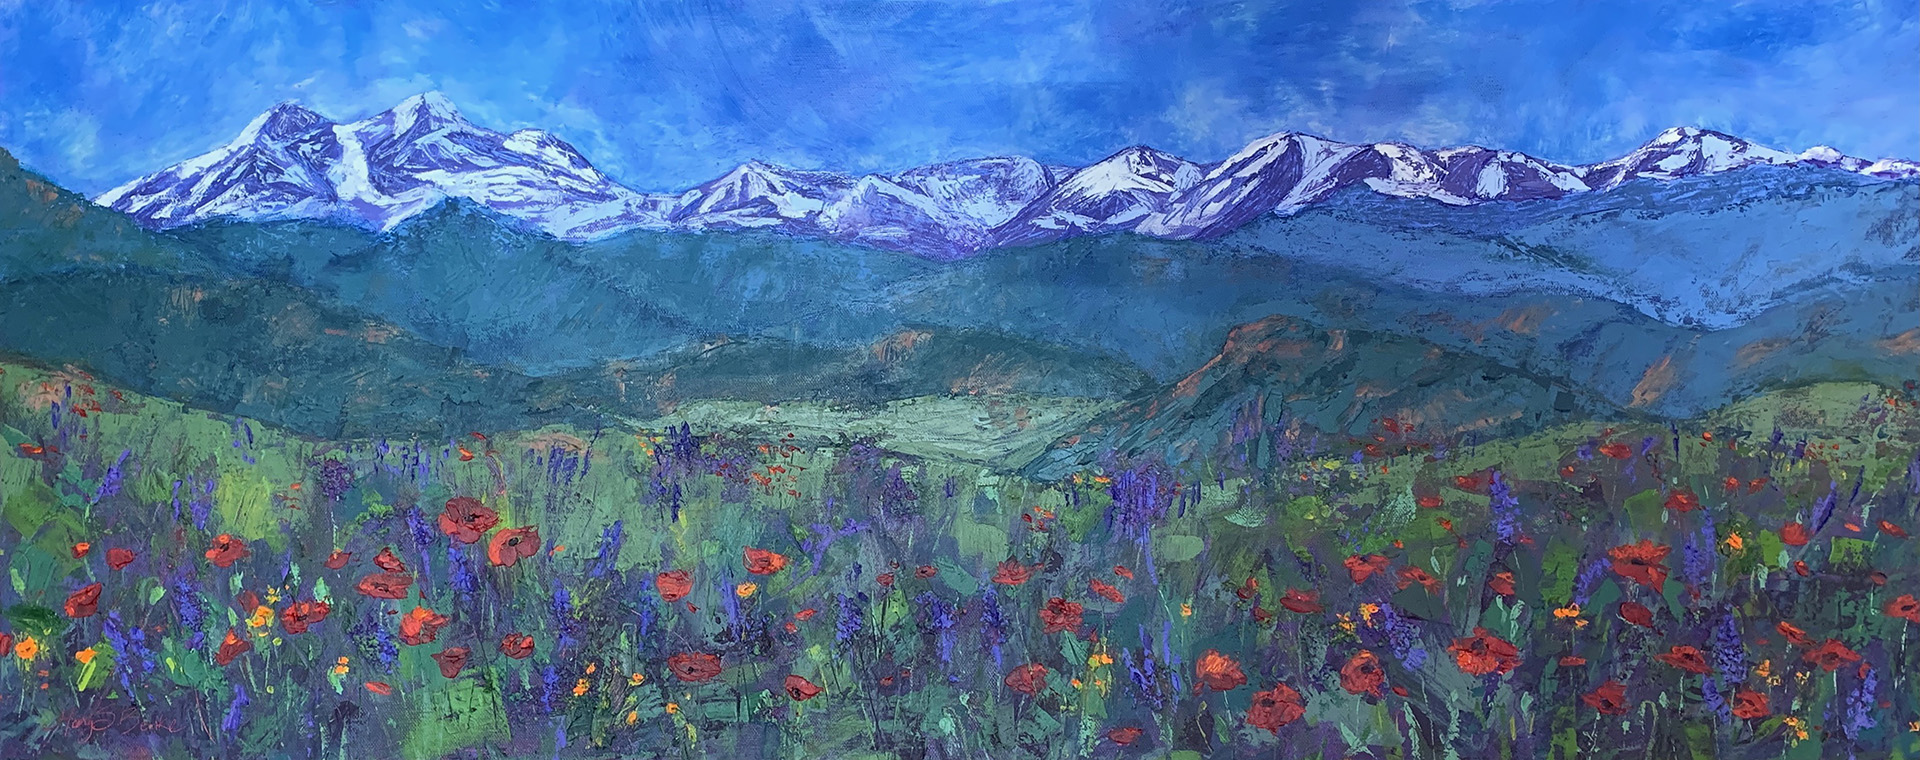 A vast panorama of Colorado's dramatic Front Range mountains forms the backdrop for peaceful foothills and poppies and lupine blooming in a meadow. Oil painting by Mary Benke